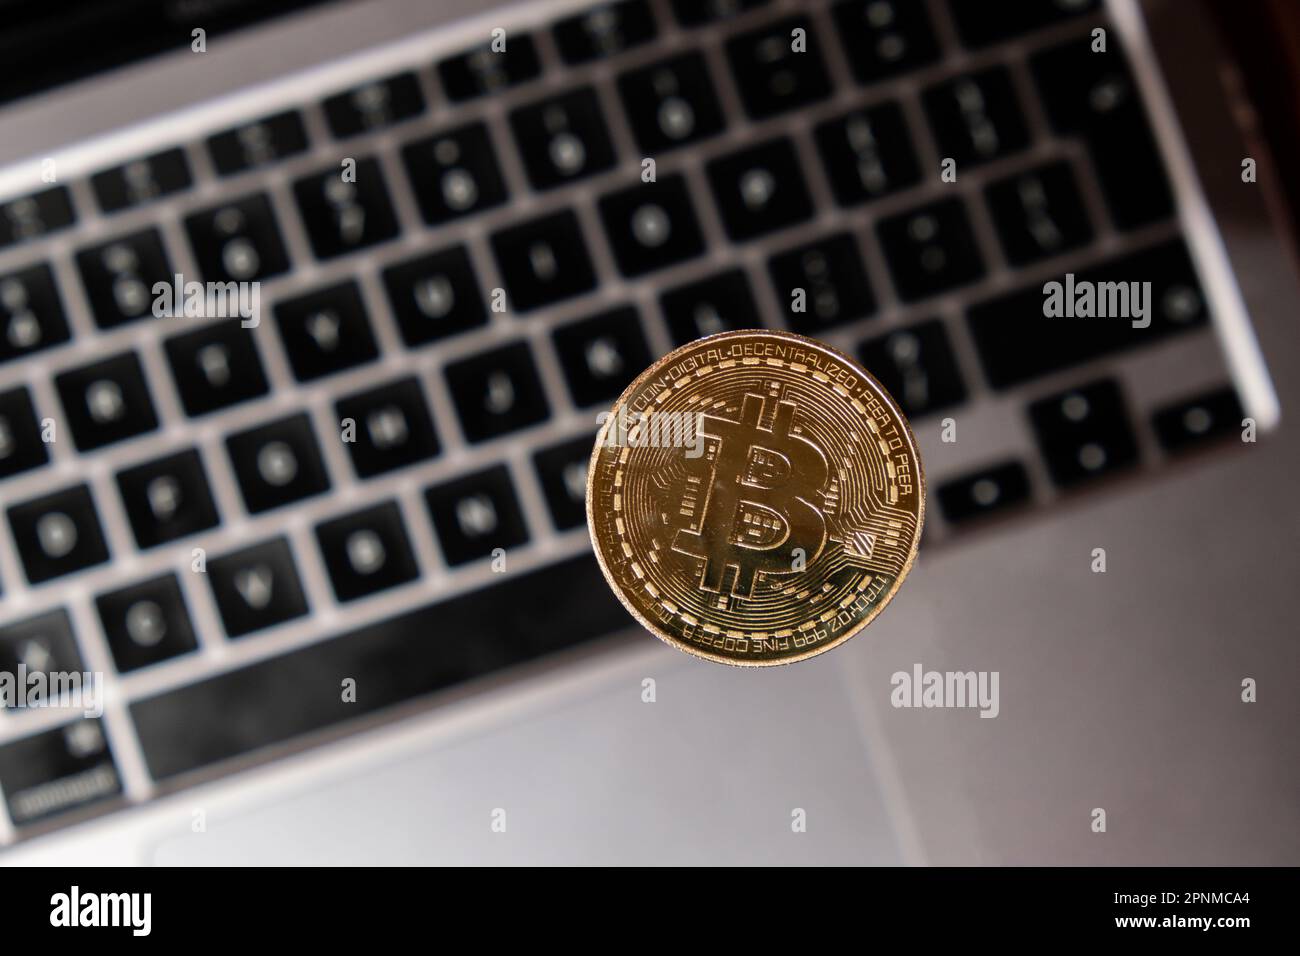 Bitcoin gold coin on keyboard of laptop Mining trading concept. BTC golden money. Worldwide virtual internet Cryptocurrency or crypto digital payment system. Digital coin money farm in digital cyberspace Stock Photo